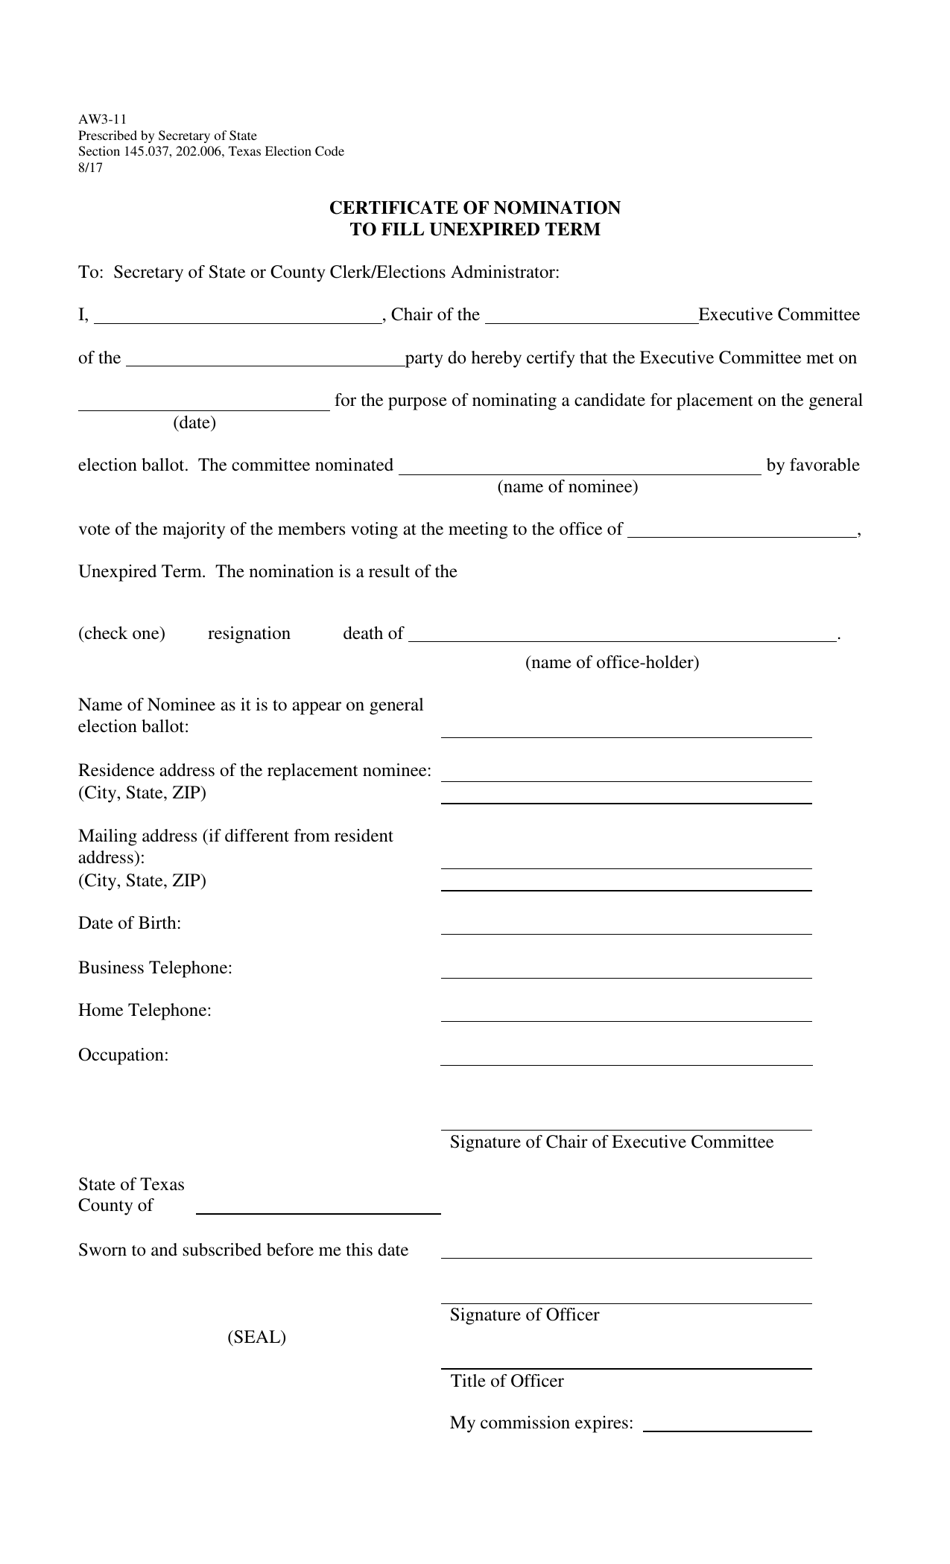 Form AW3-11 Certificate of Nomination to Fill Unexpired Term - Texas, Page 1